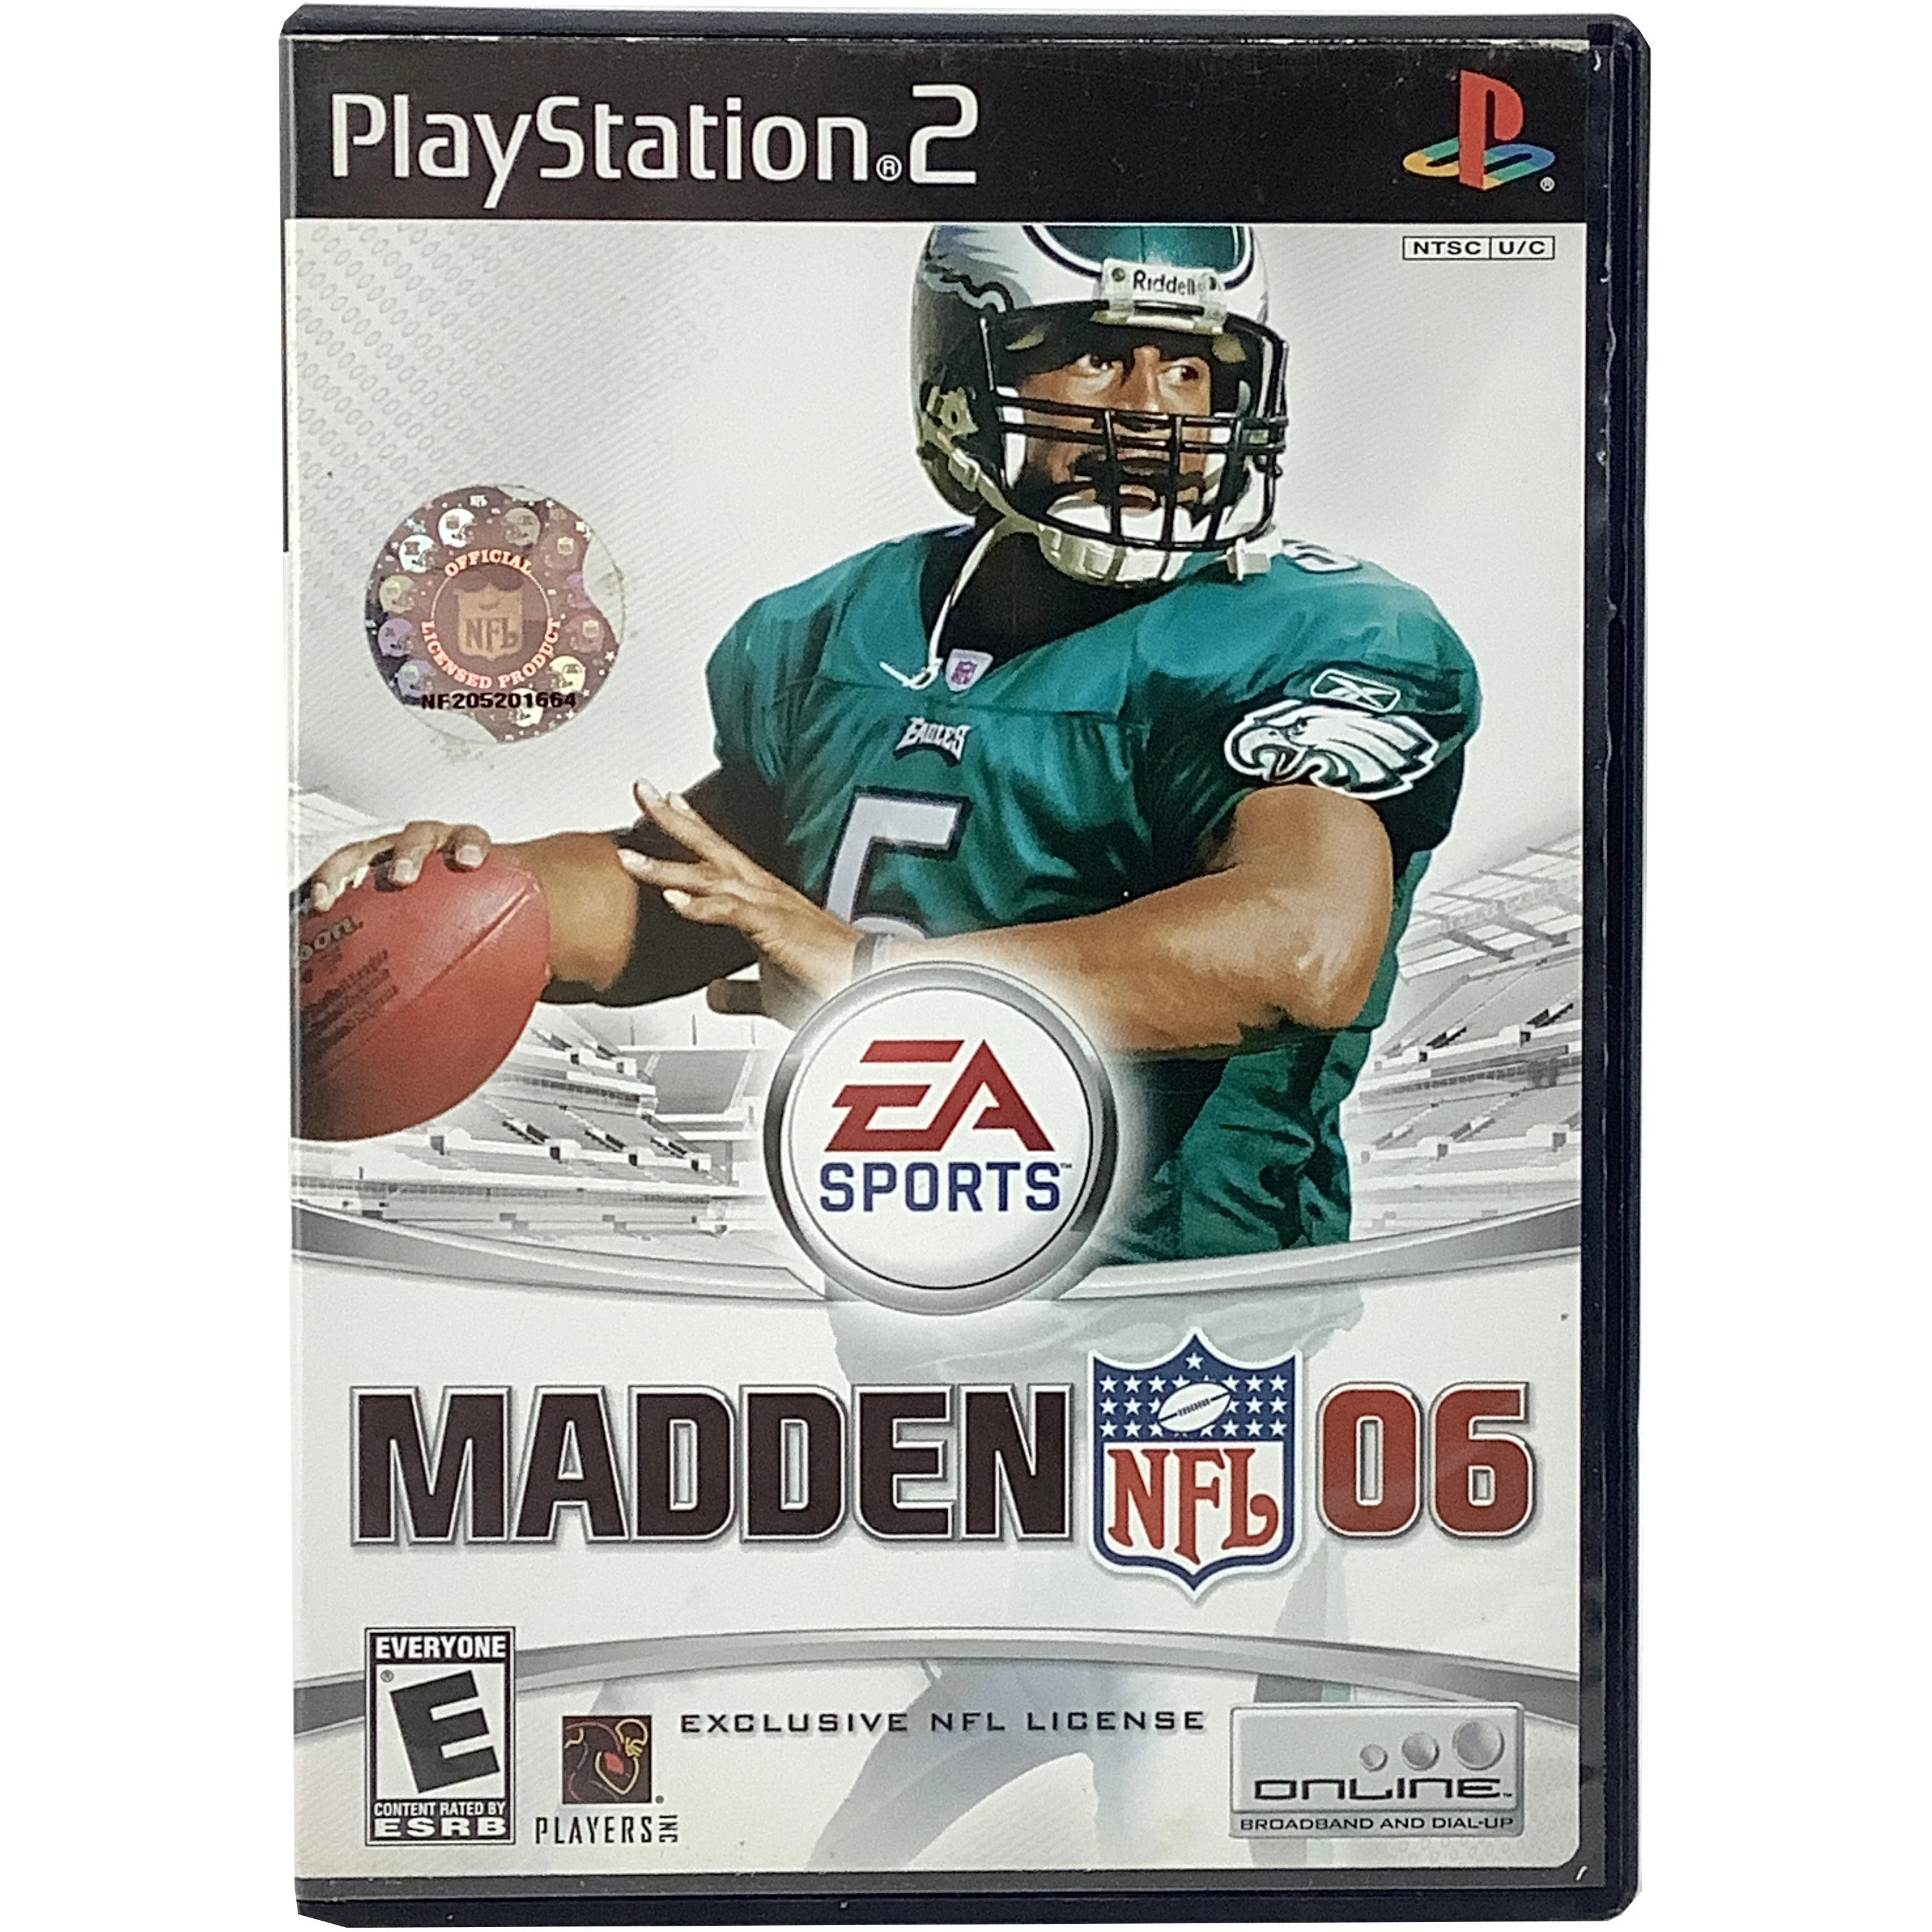 PlayStation 2 / "NFL Madden 06" Game / Video Game **OPENED**